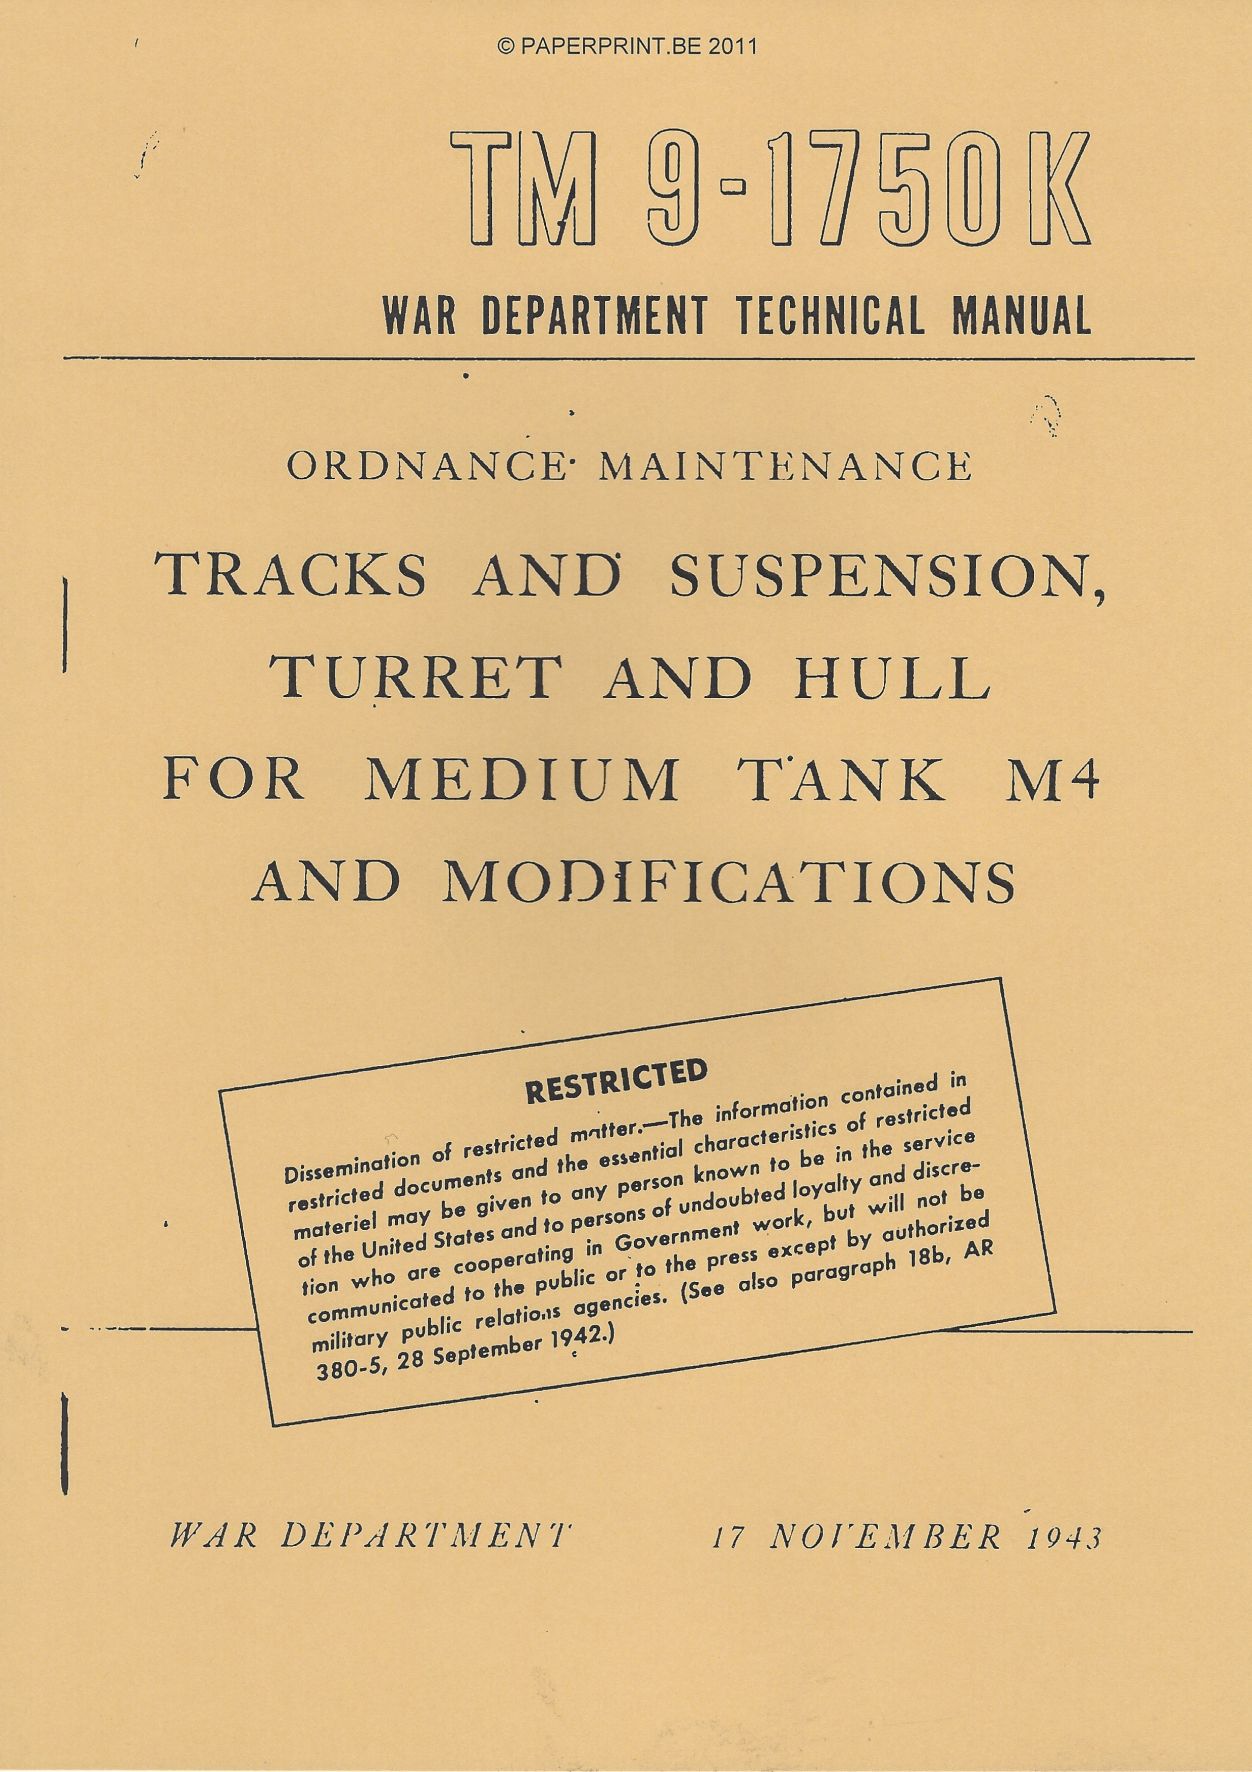 TM 9-1750K US TRACKS AND SUSPENSION, TURRET AND HULL FOR MEDIUM TANK M4 AND MODIFICATIONS